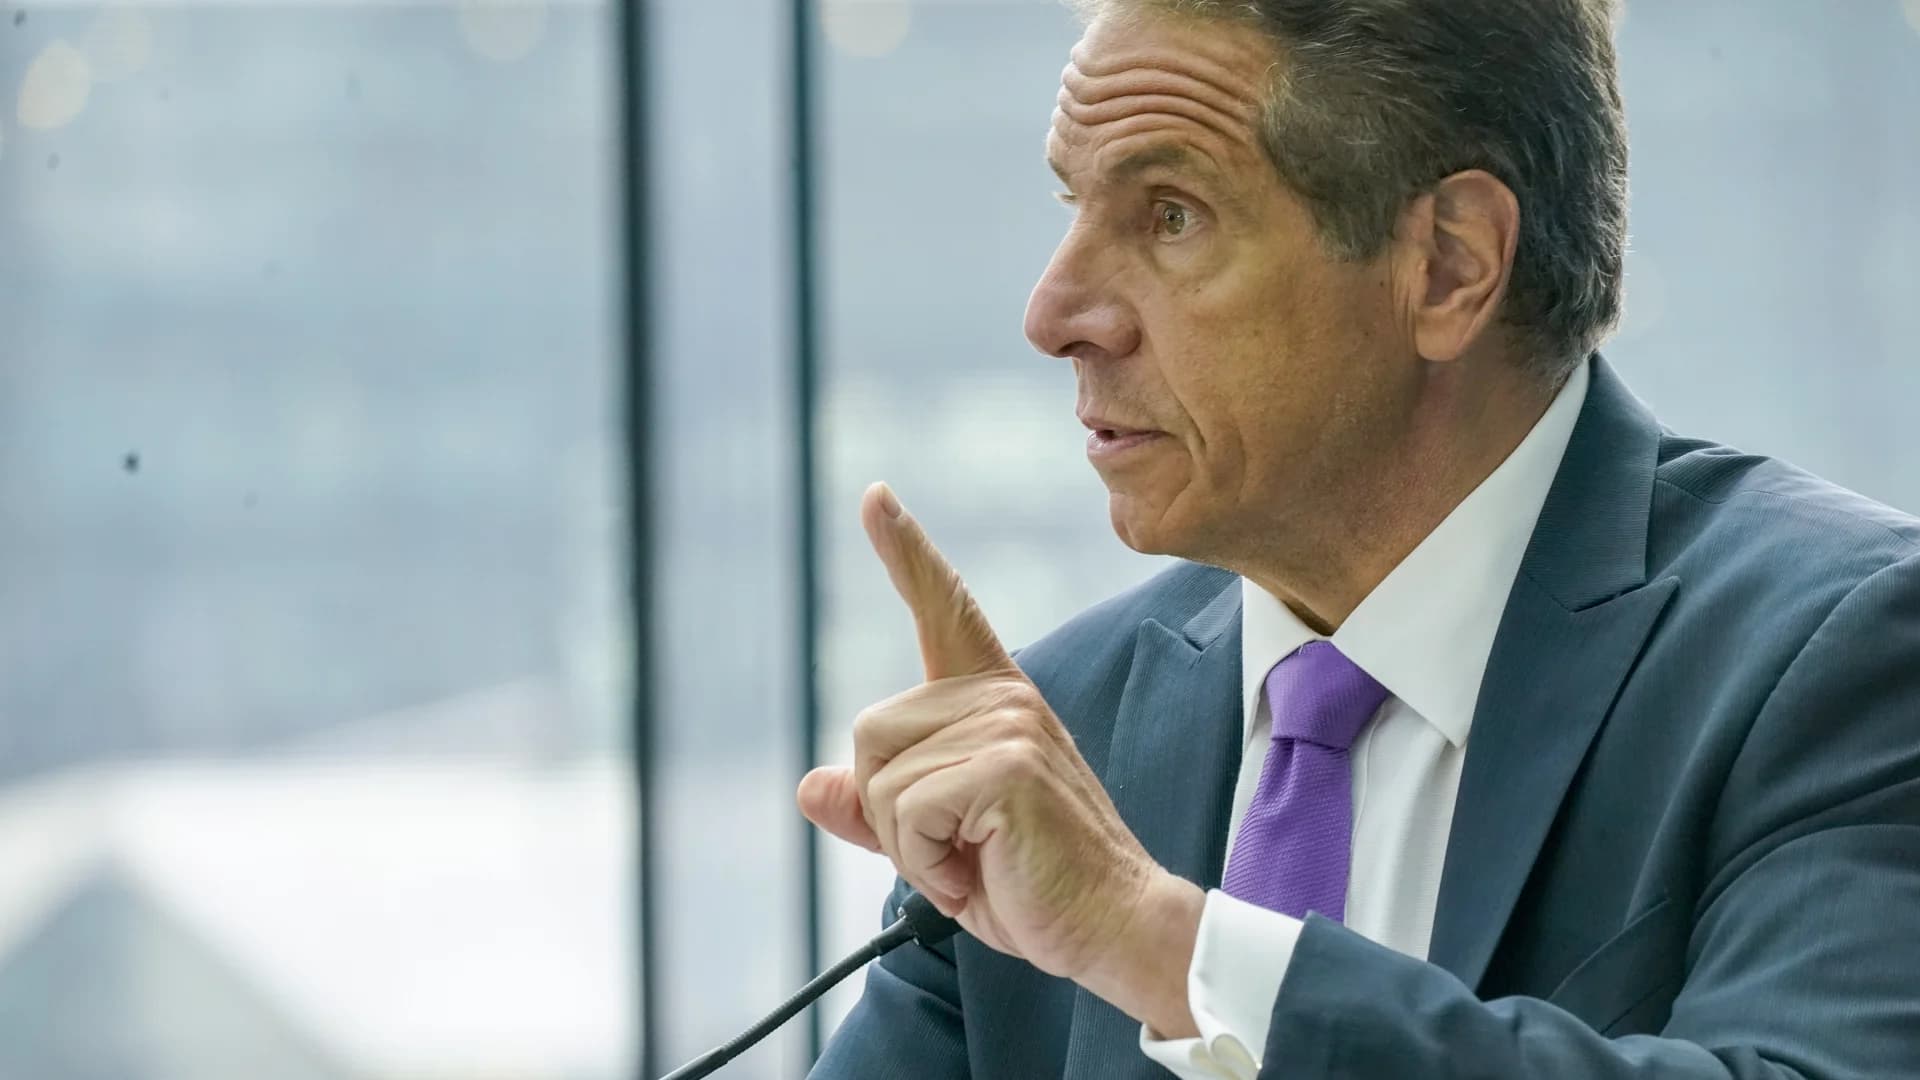 Gov. Cuomo set to earn $5 million from book on COVID-19 crisis